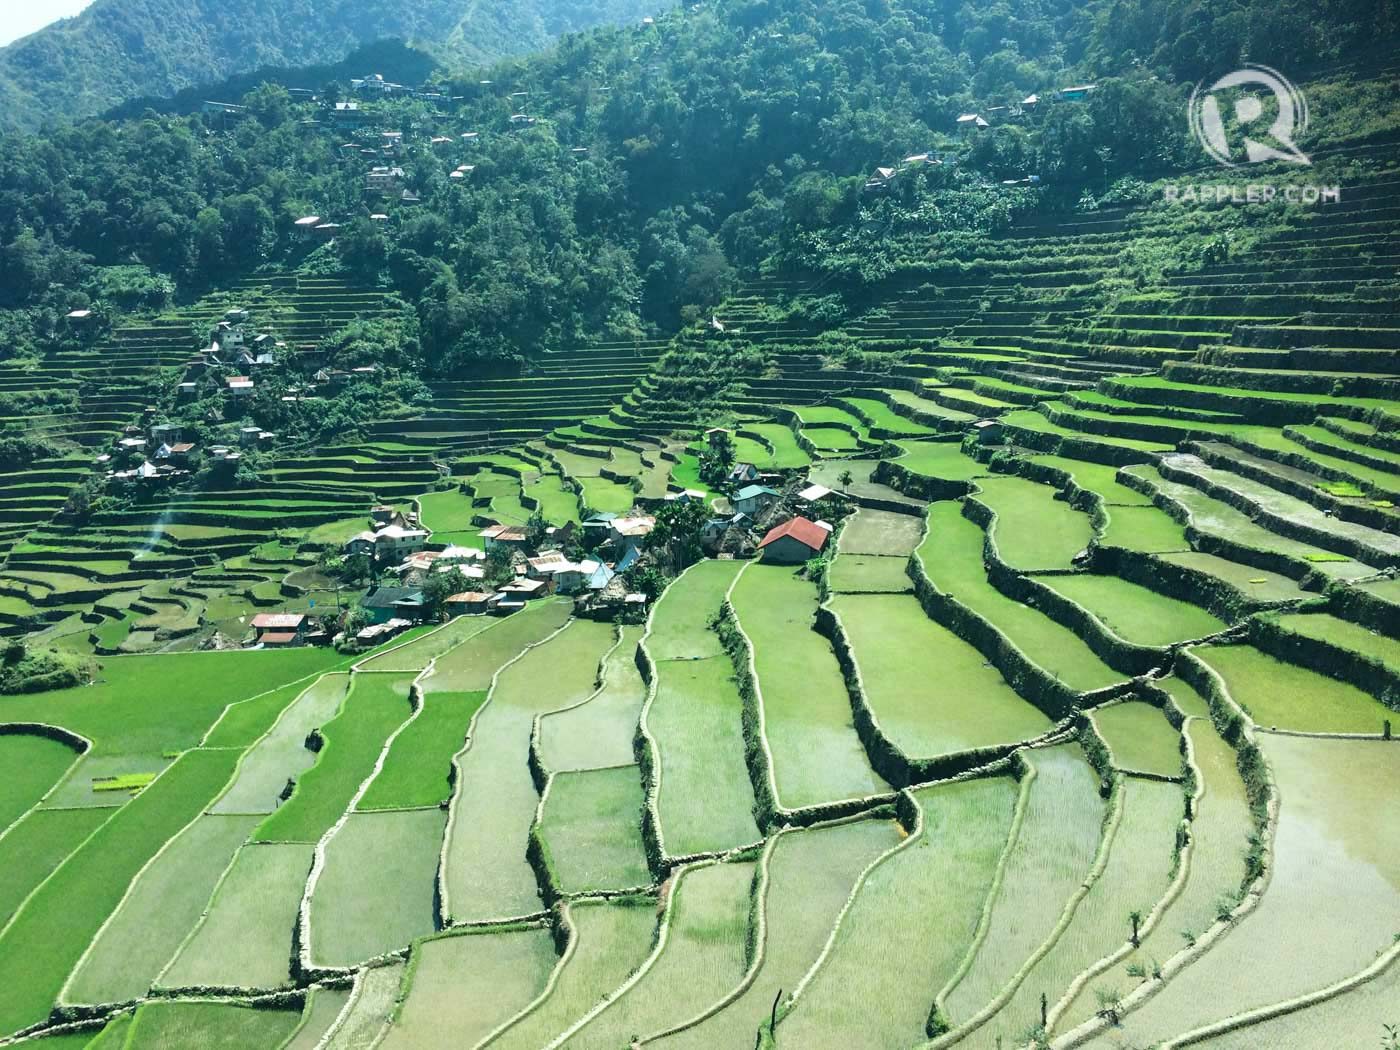 Visiting the Ifugao rice terraces? A few things to reflect on